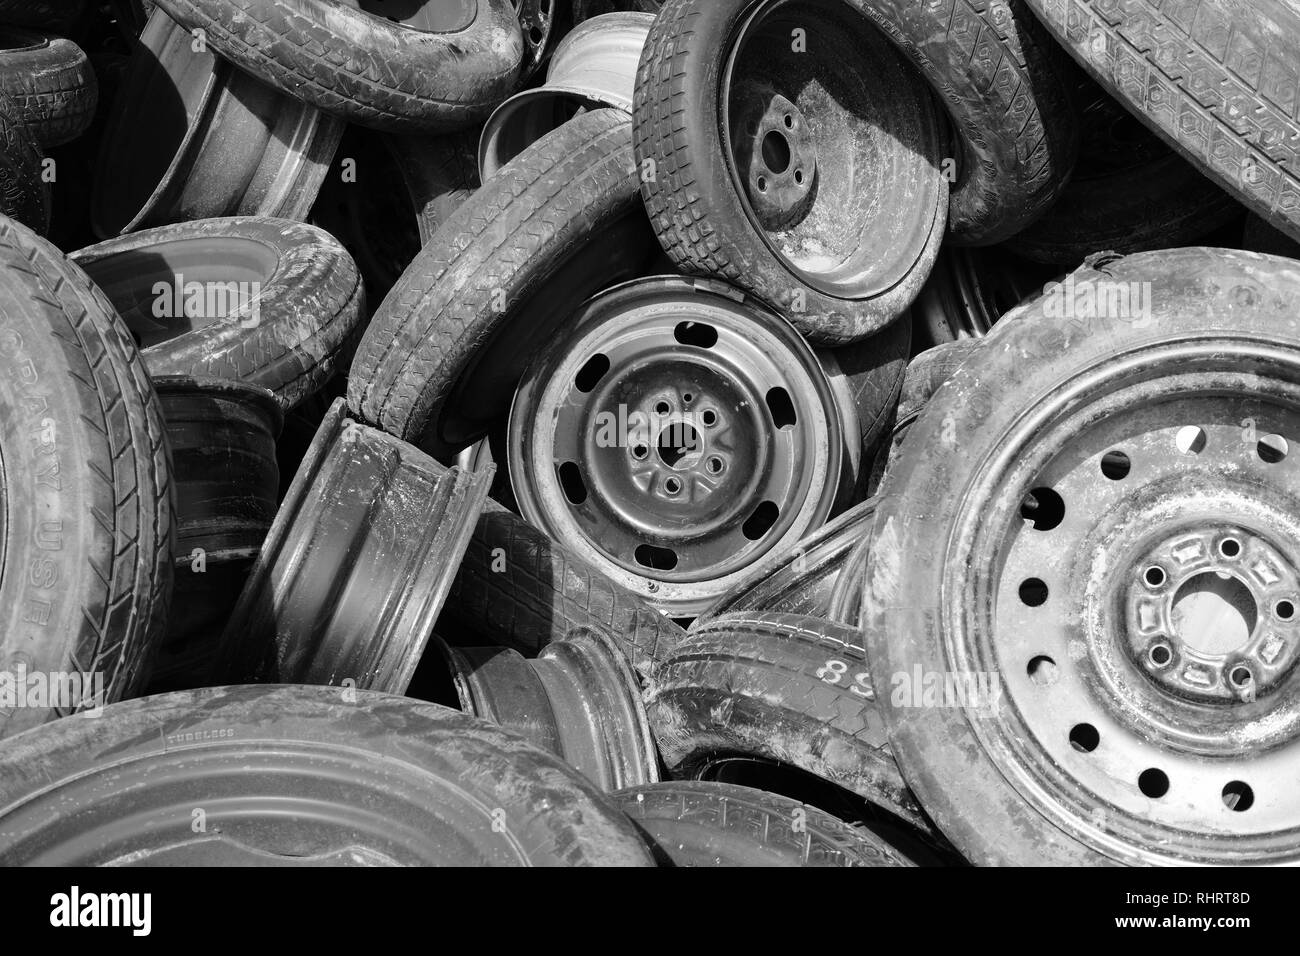 Randomly placed used or discarded tires with rims or wheels; Austin, Texas, USA. Stock Photo